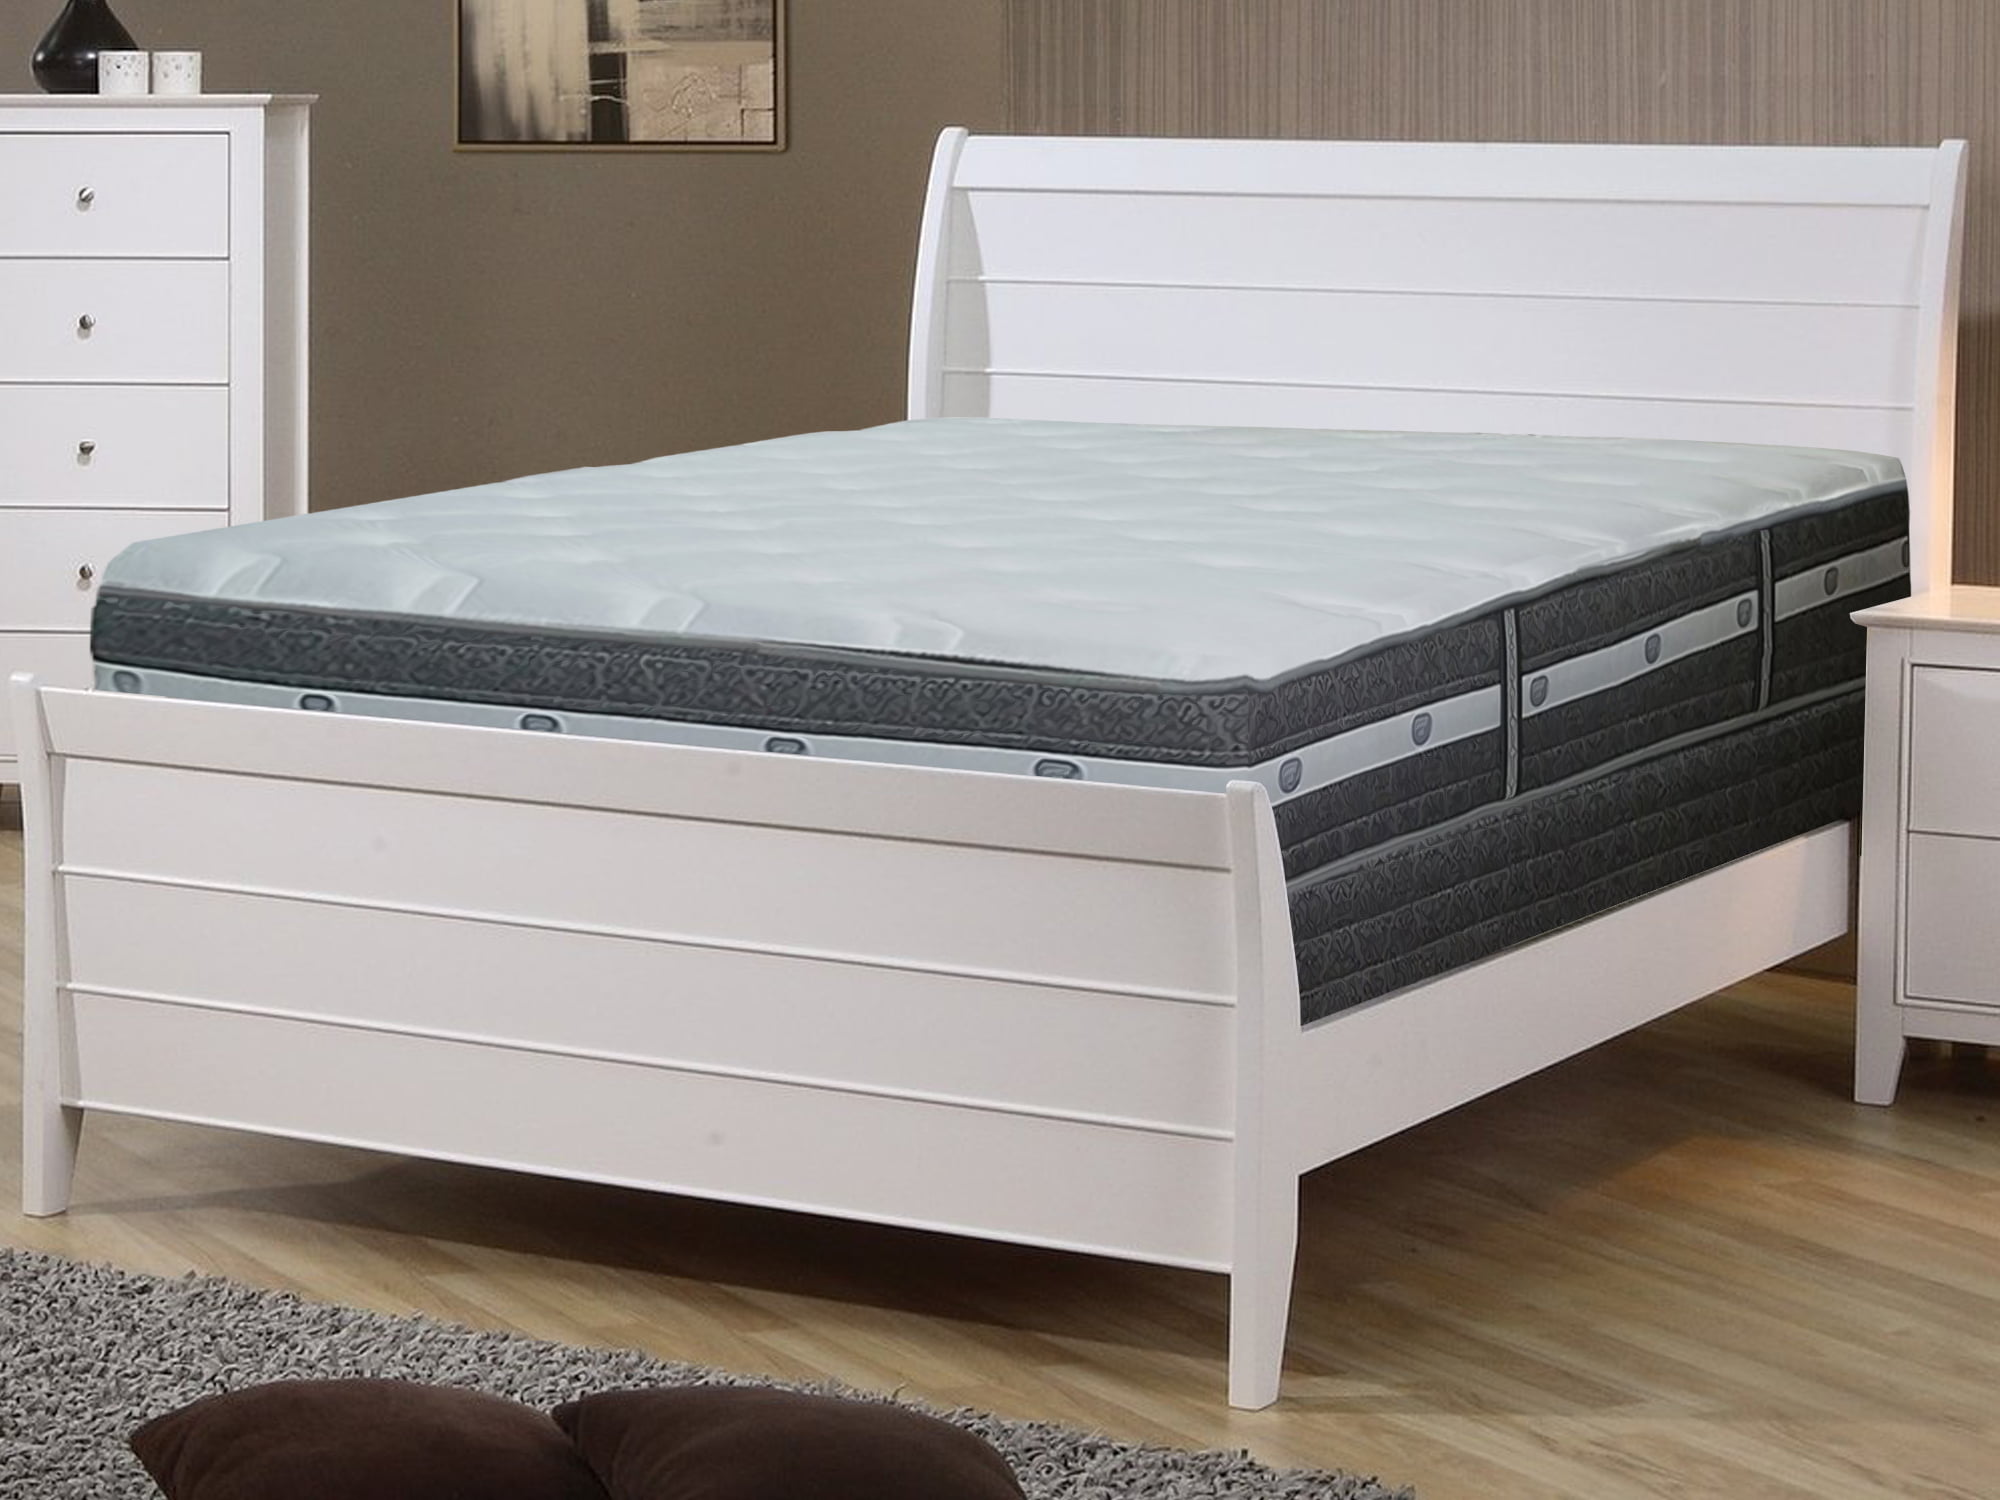 mattress frame with spring